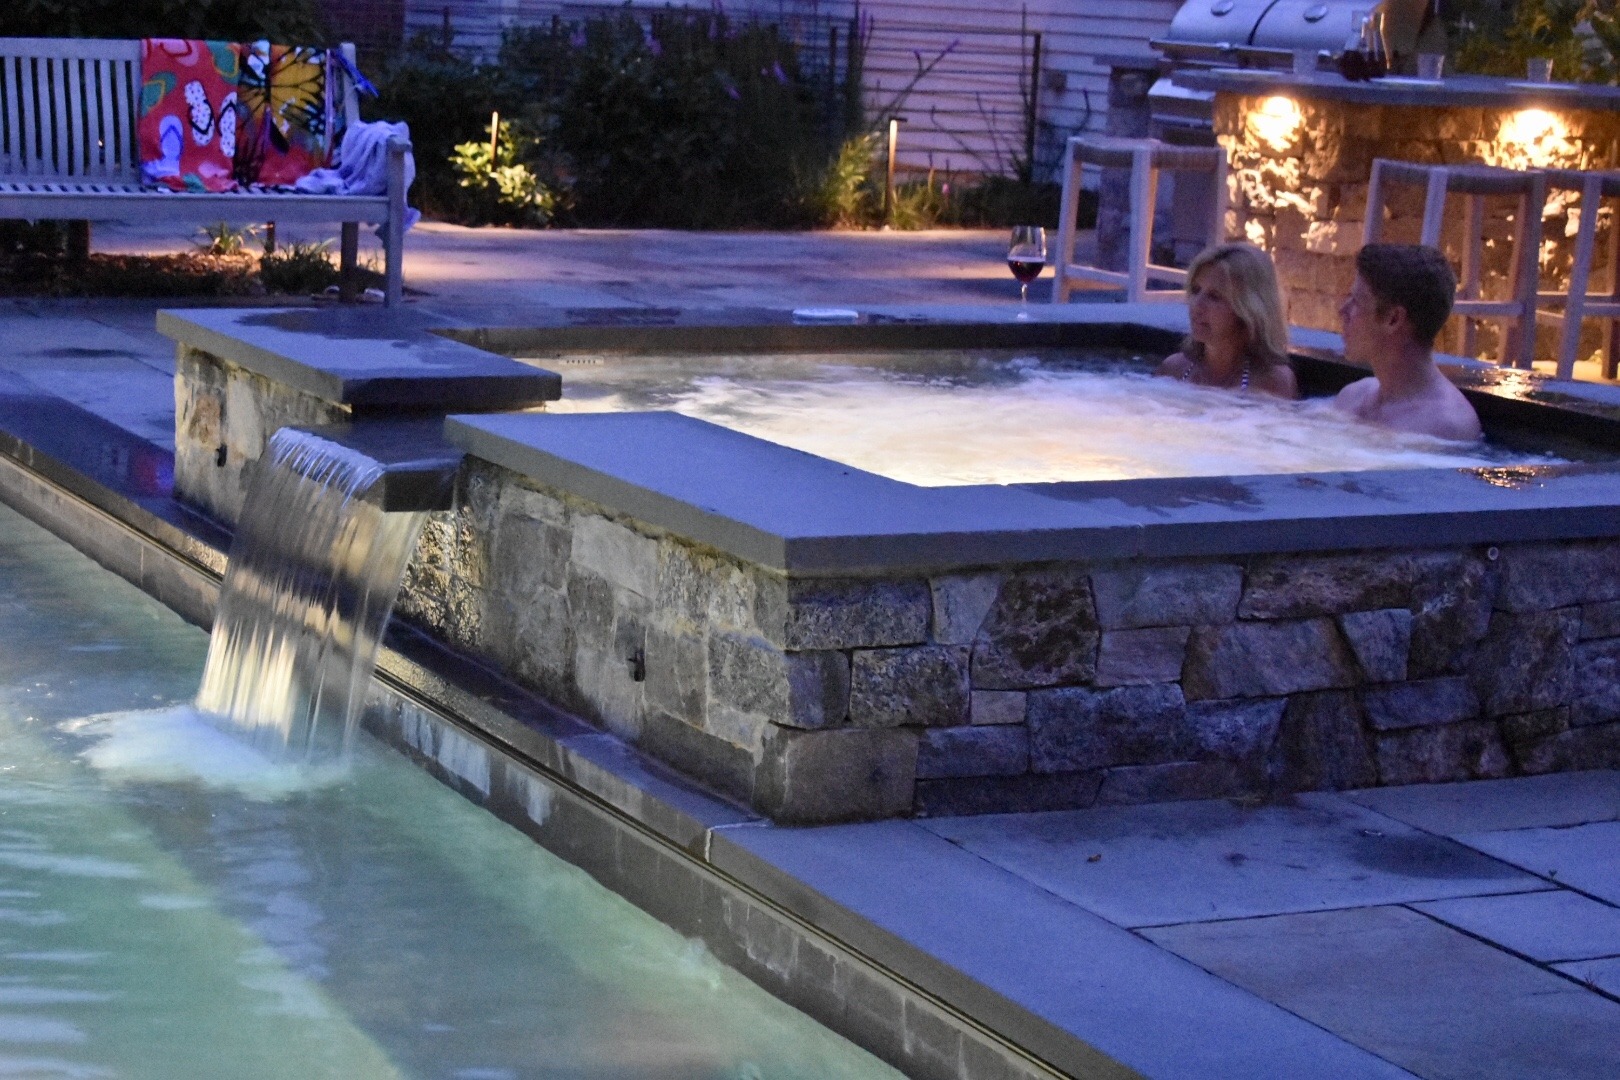 Two people relax in a hot tub with bubbling water at dusk. Nearby, water cascades from a stone feature into a serene pool.